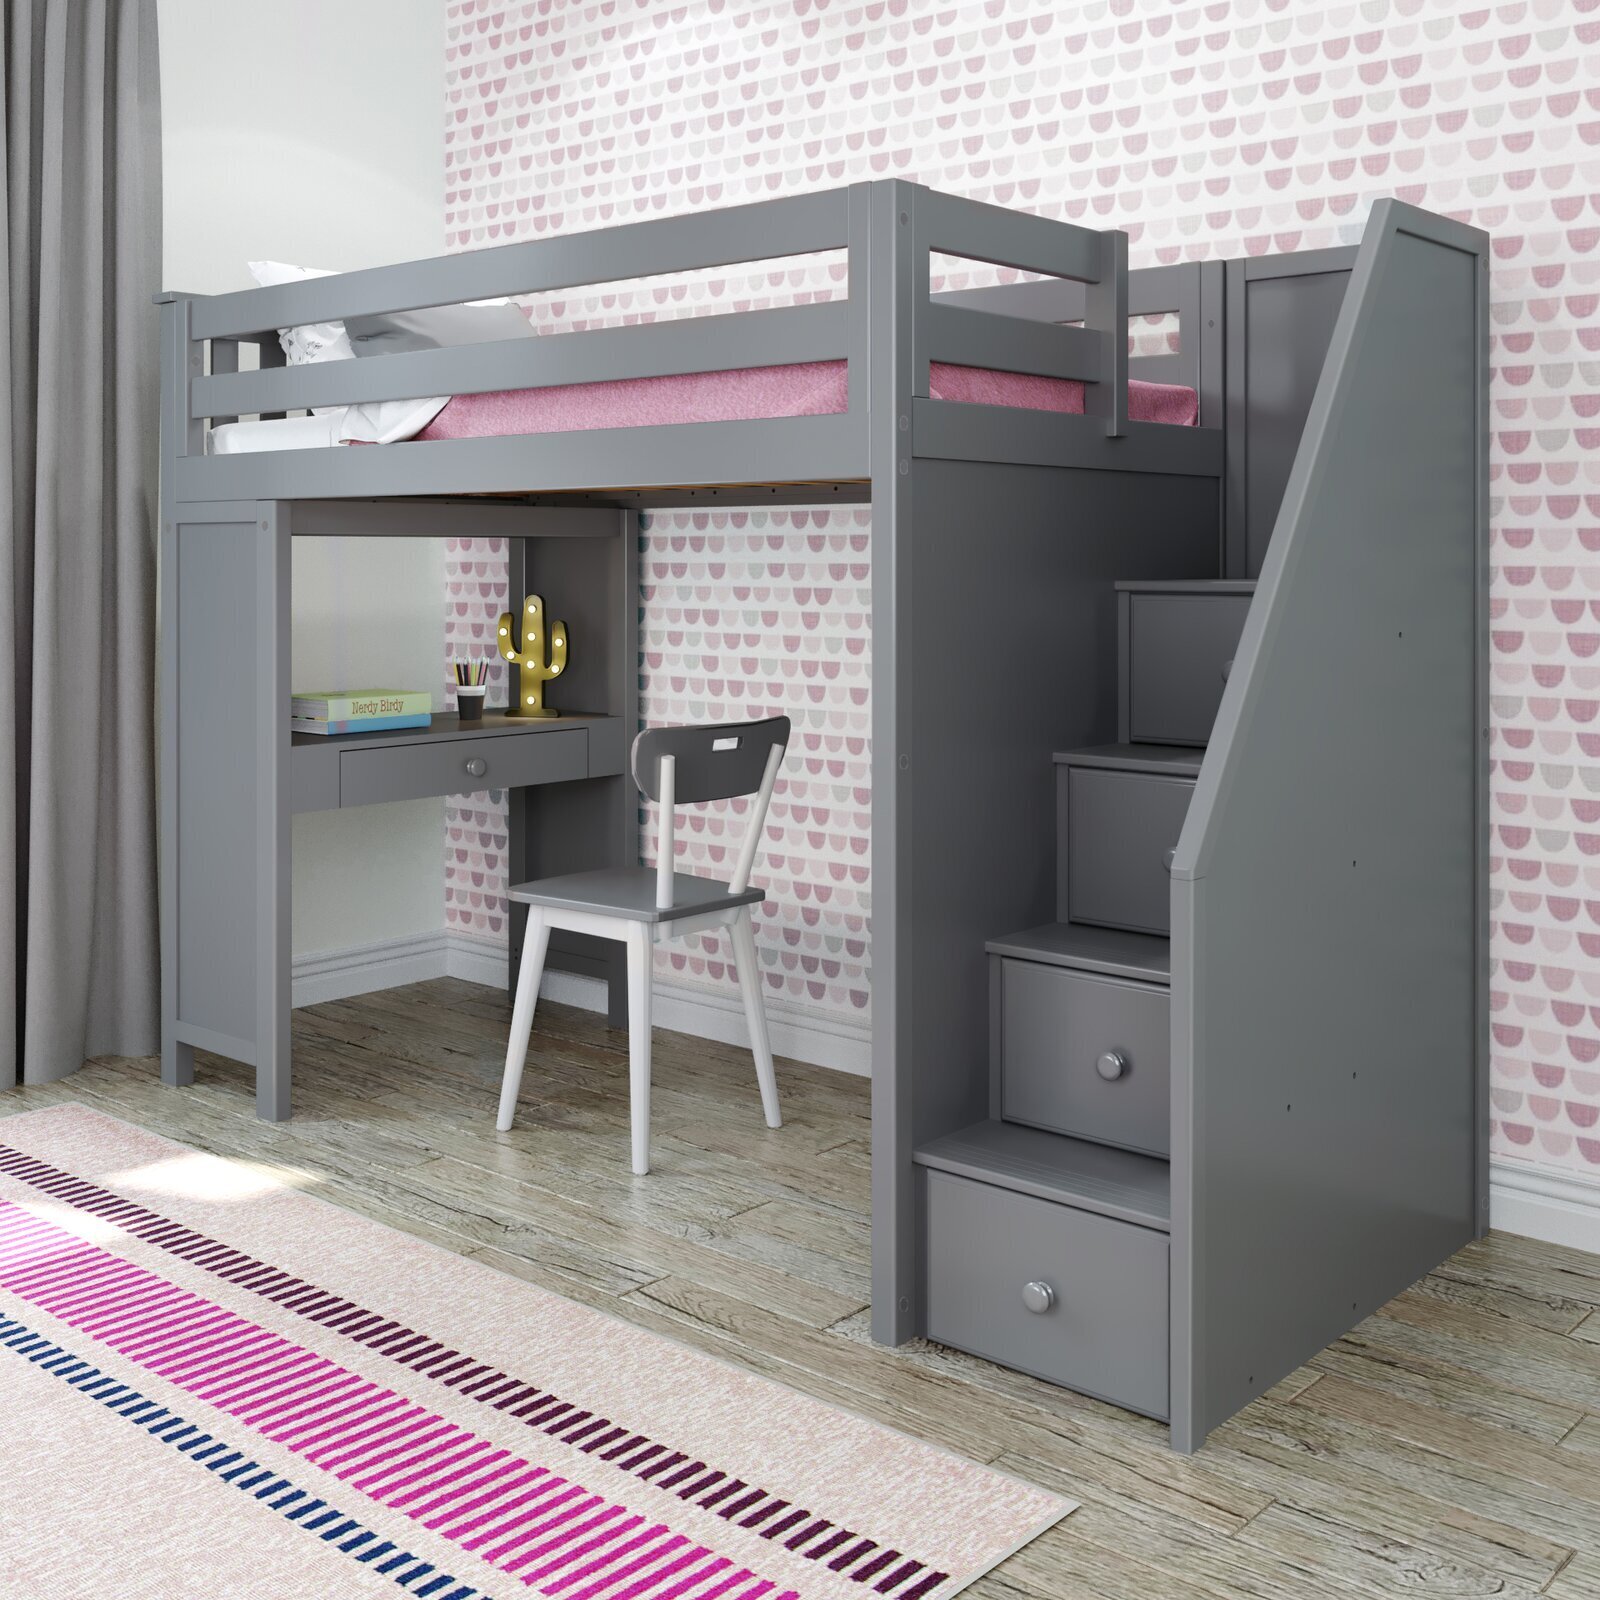 Loft bed with stairs, a small desk, and bottom space